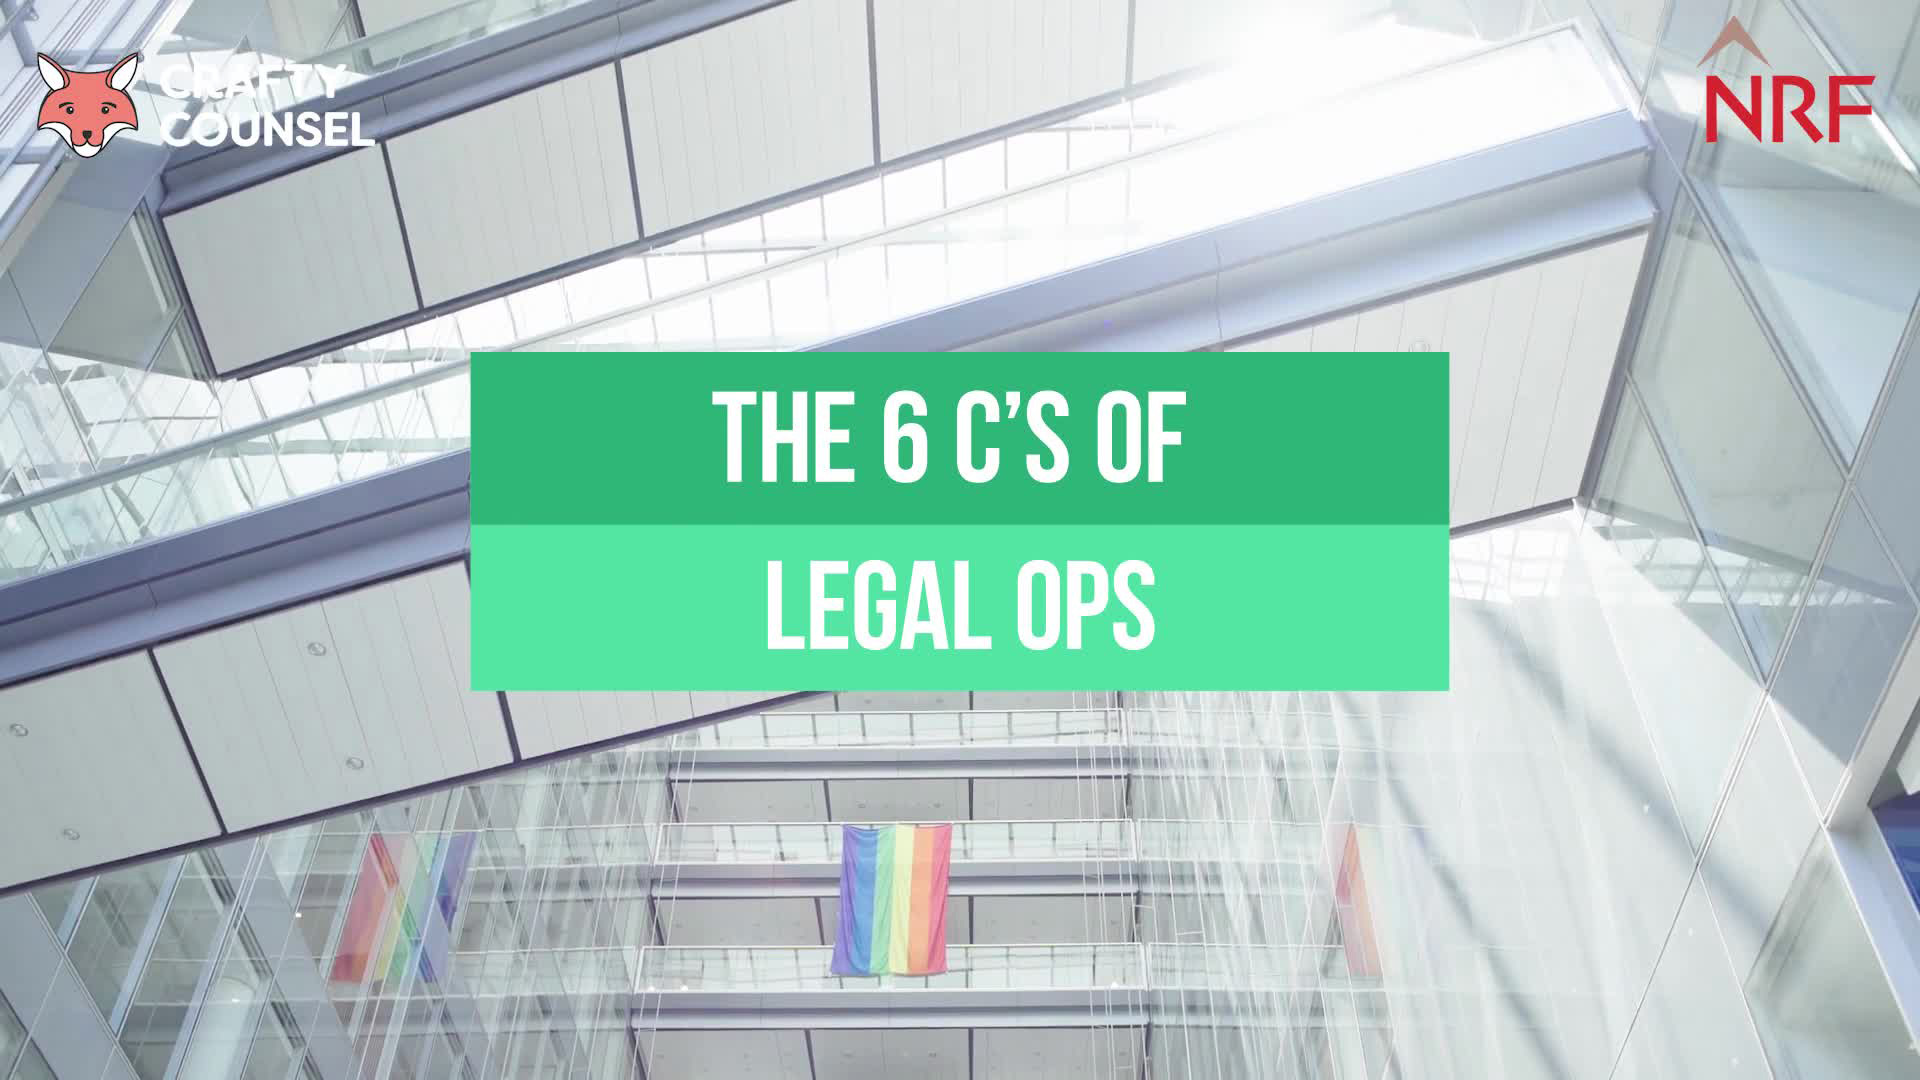 Episode 2: 6 C’s of Legal Ops – Consolidate